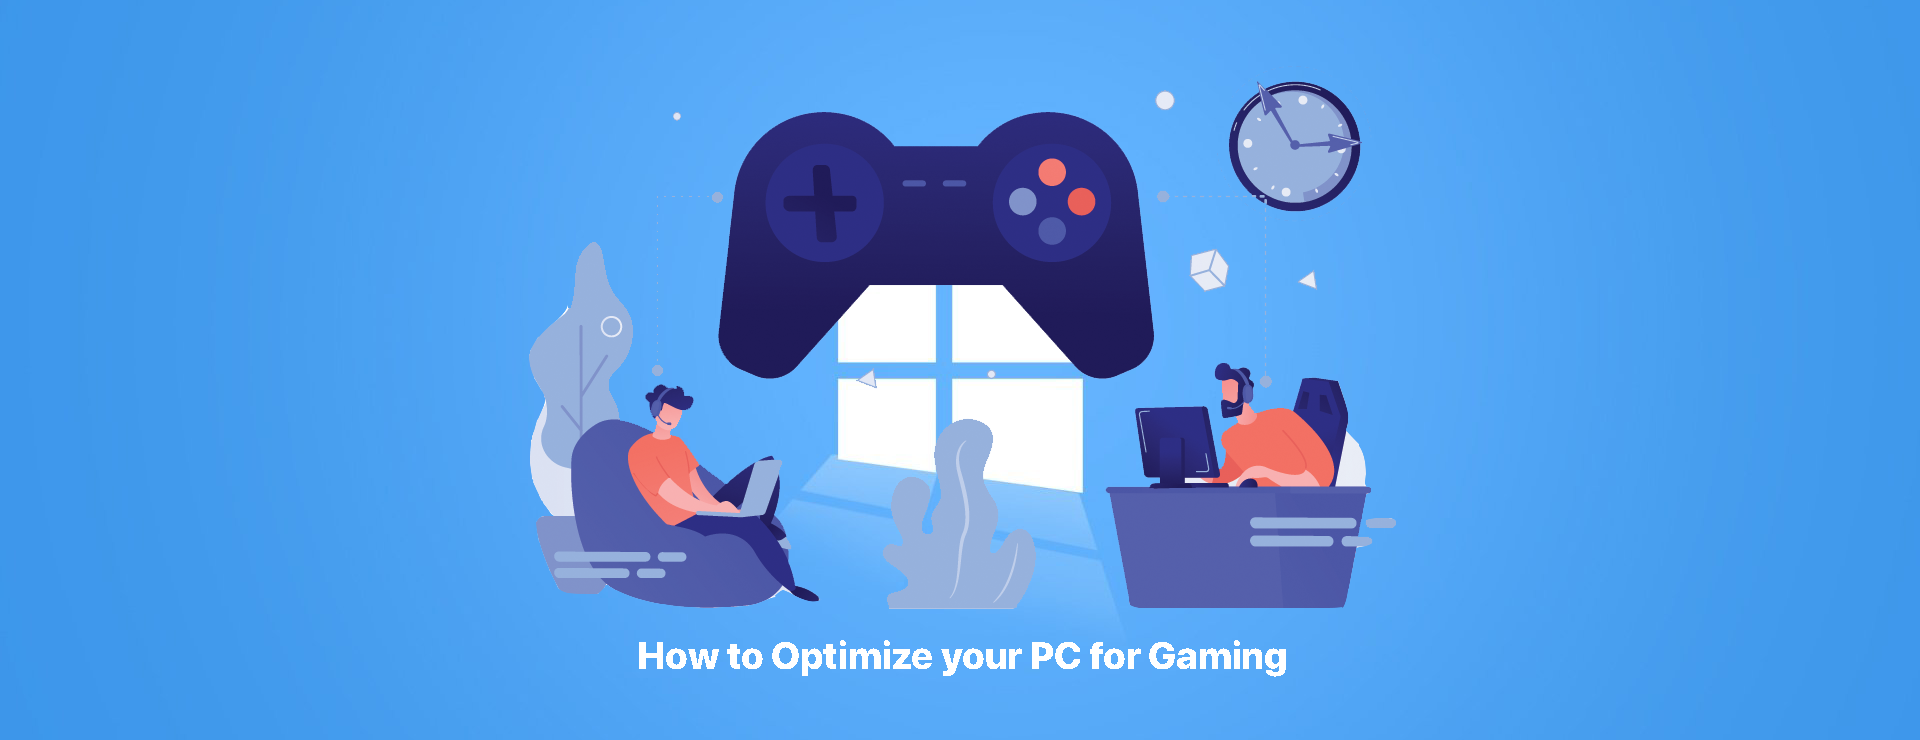 optimize pc for gaming updated